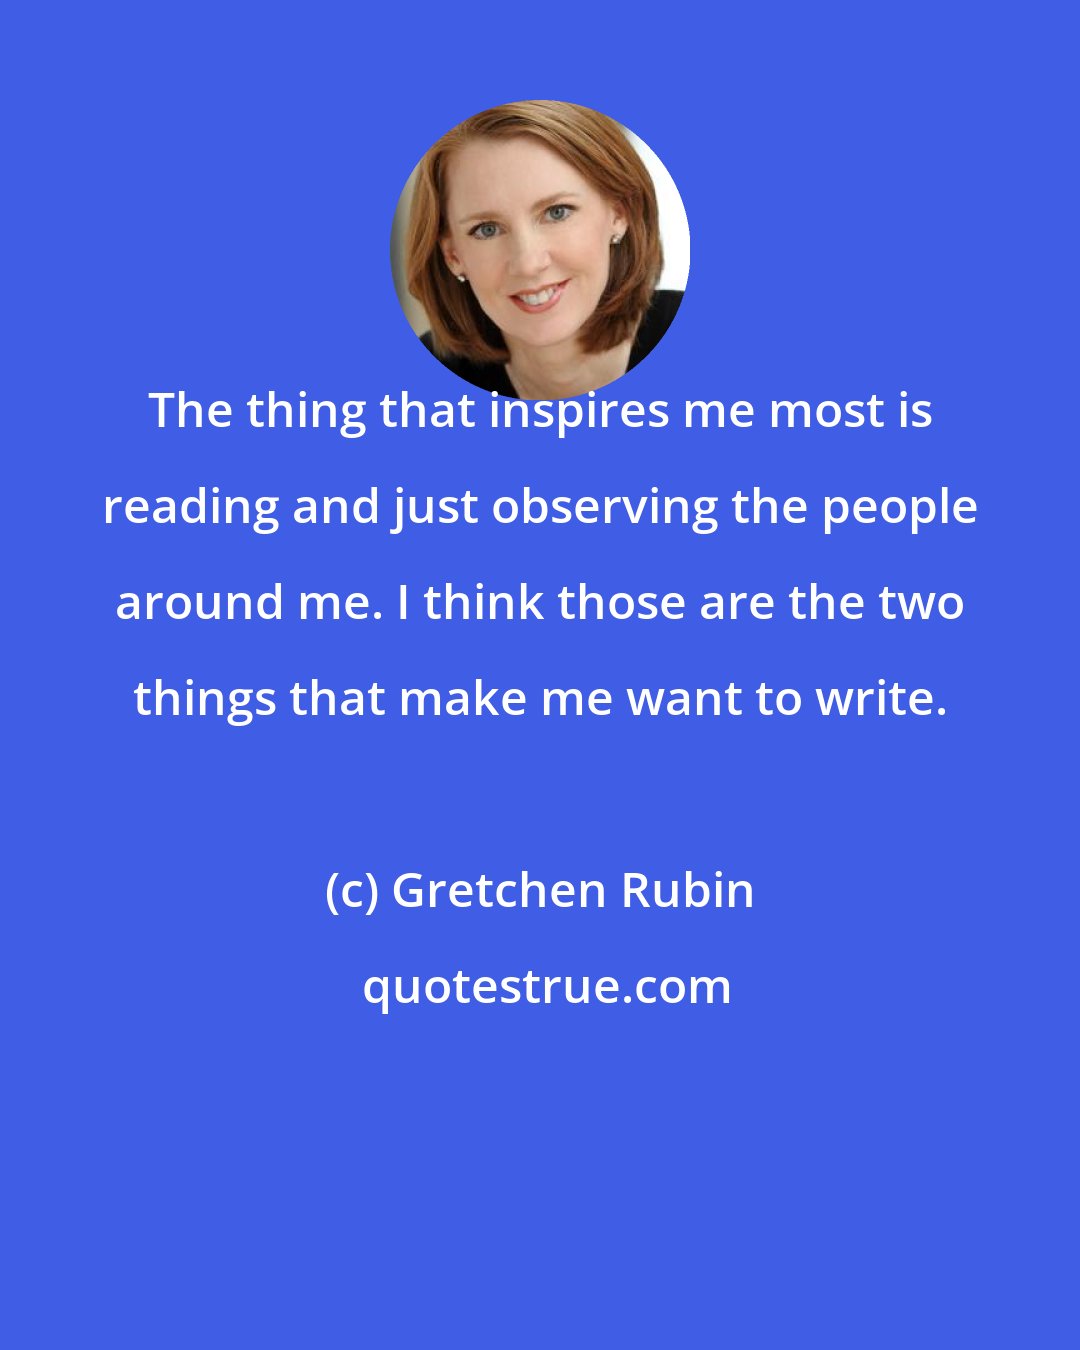 Gretchen Rubin: The thing that inspires me most is reading and just observing the people around me. I think those are the two things that make me want to write.